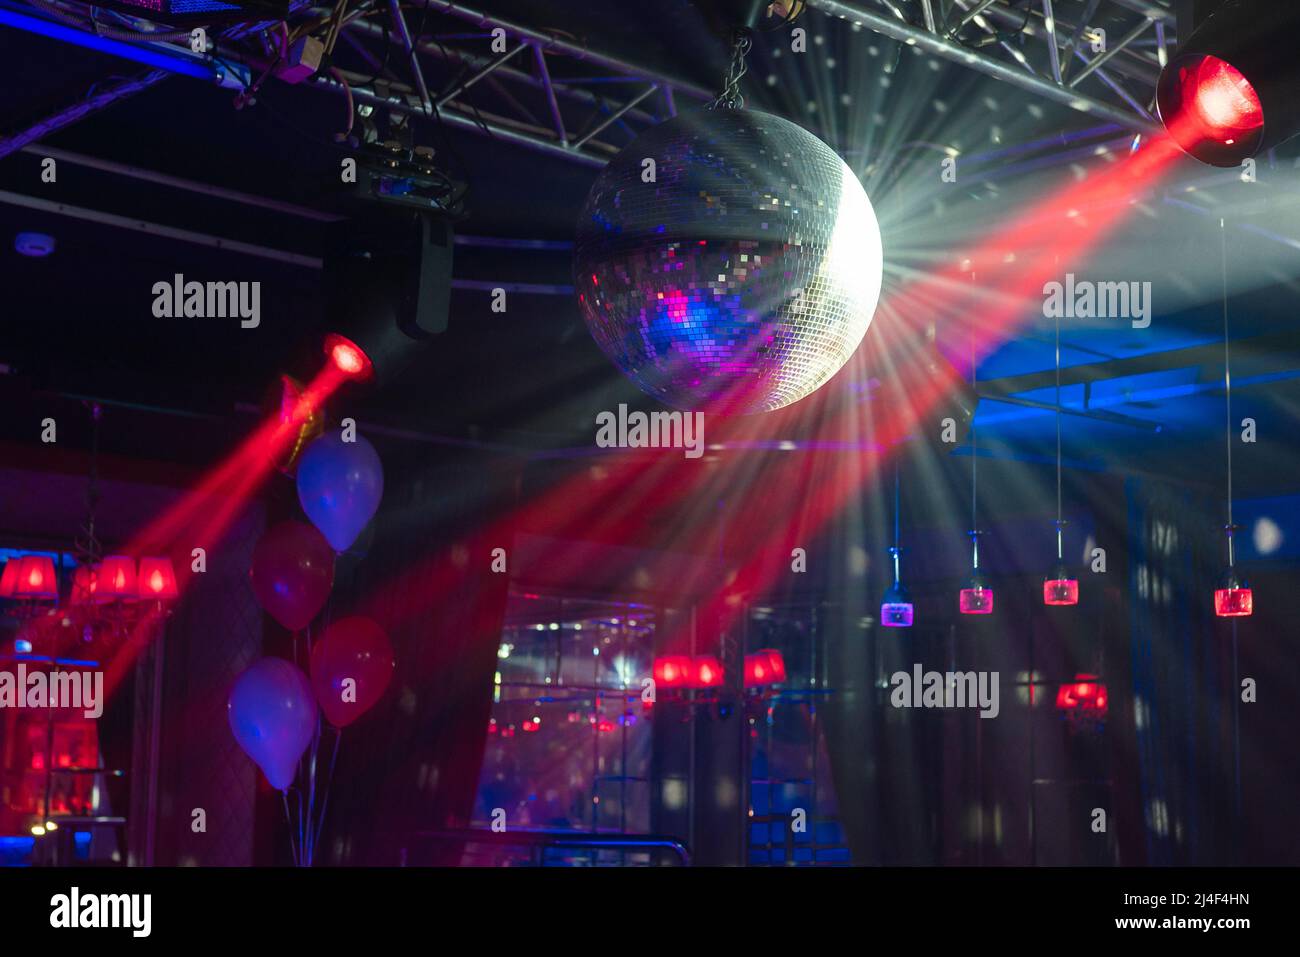 disco mirror ball. Abstract background from a night club. party lights disco ball. Stock Photo